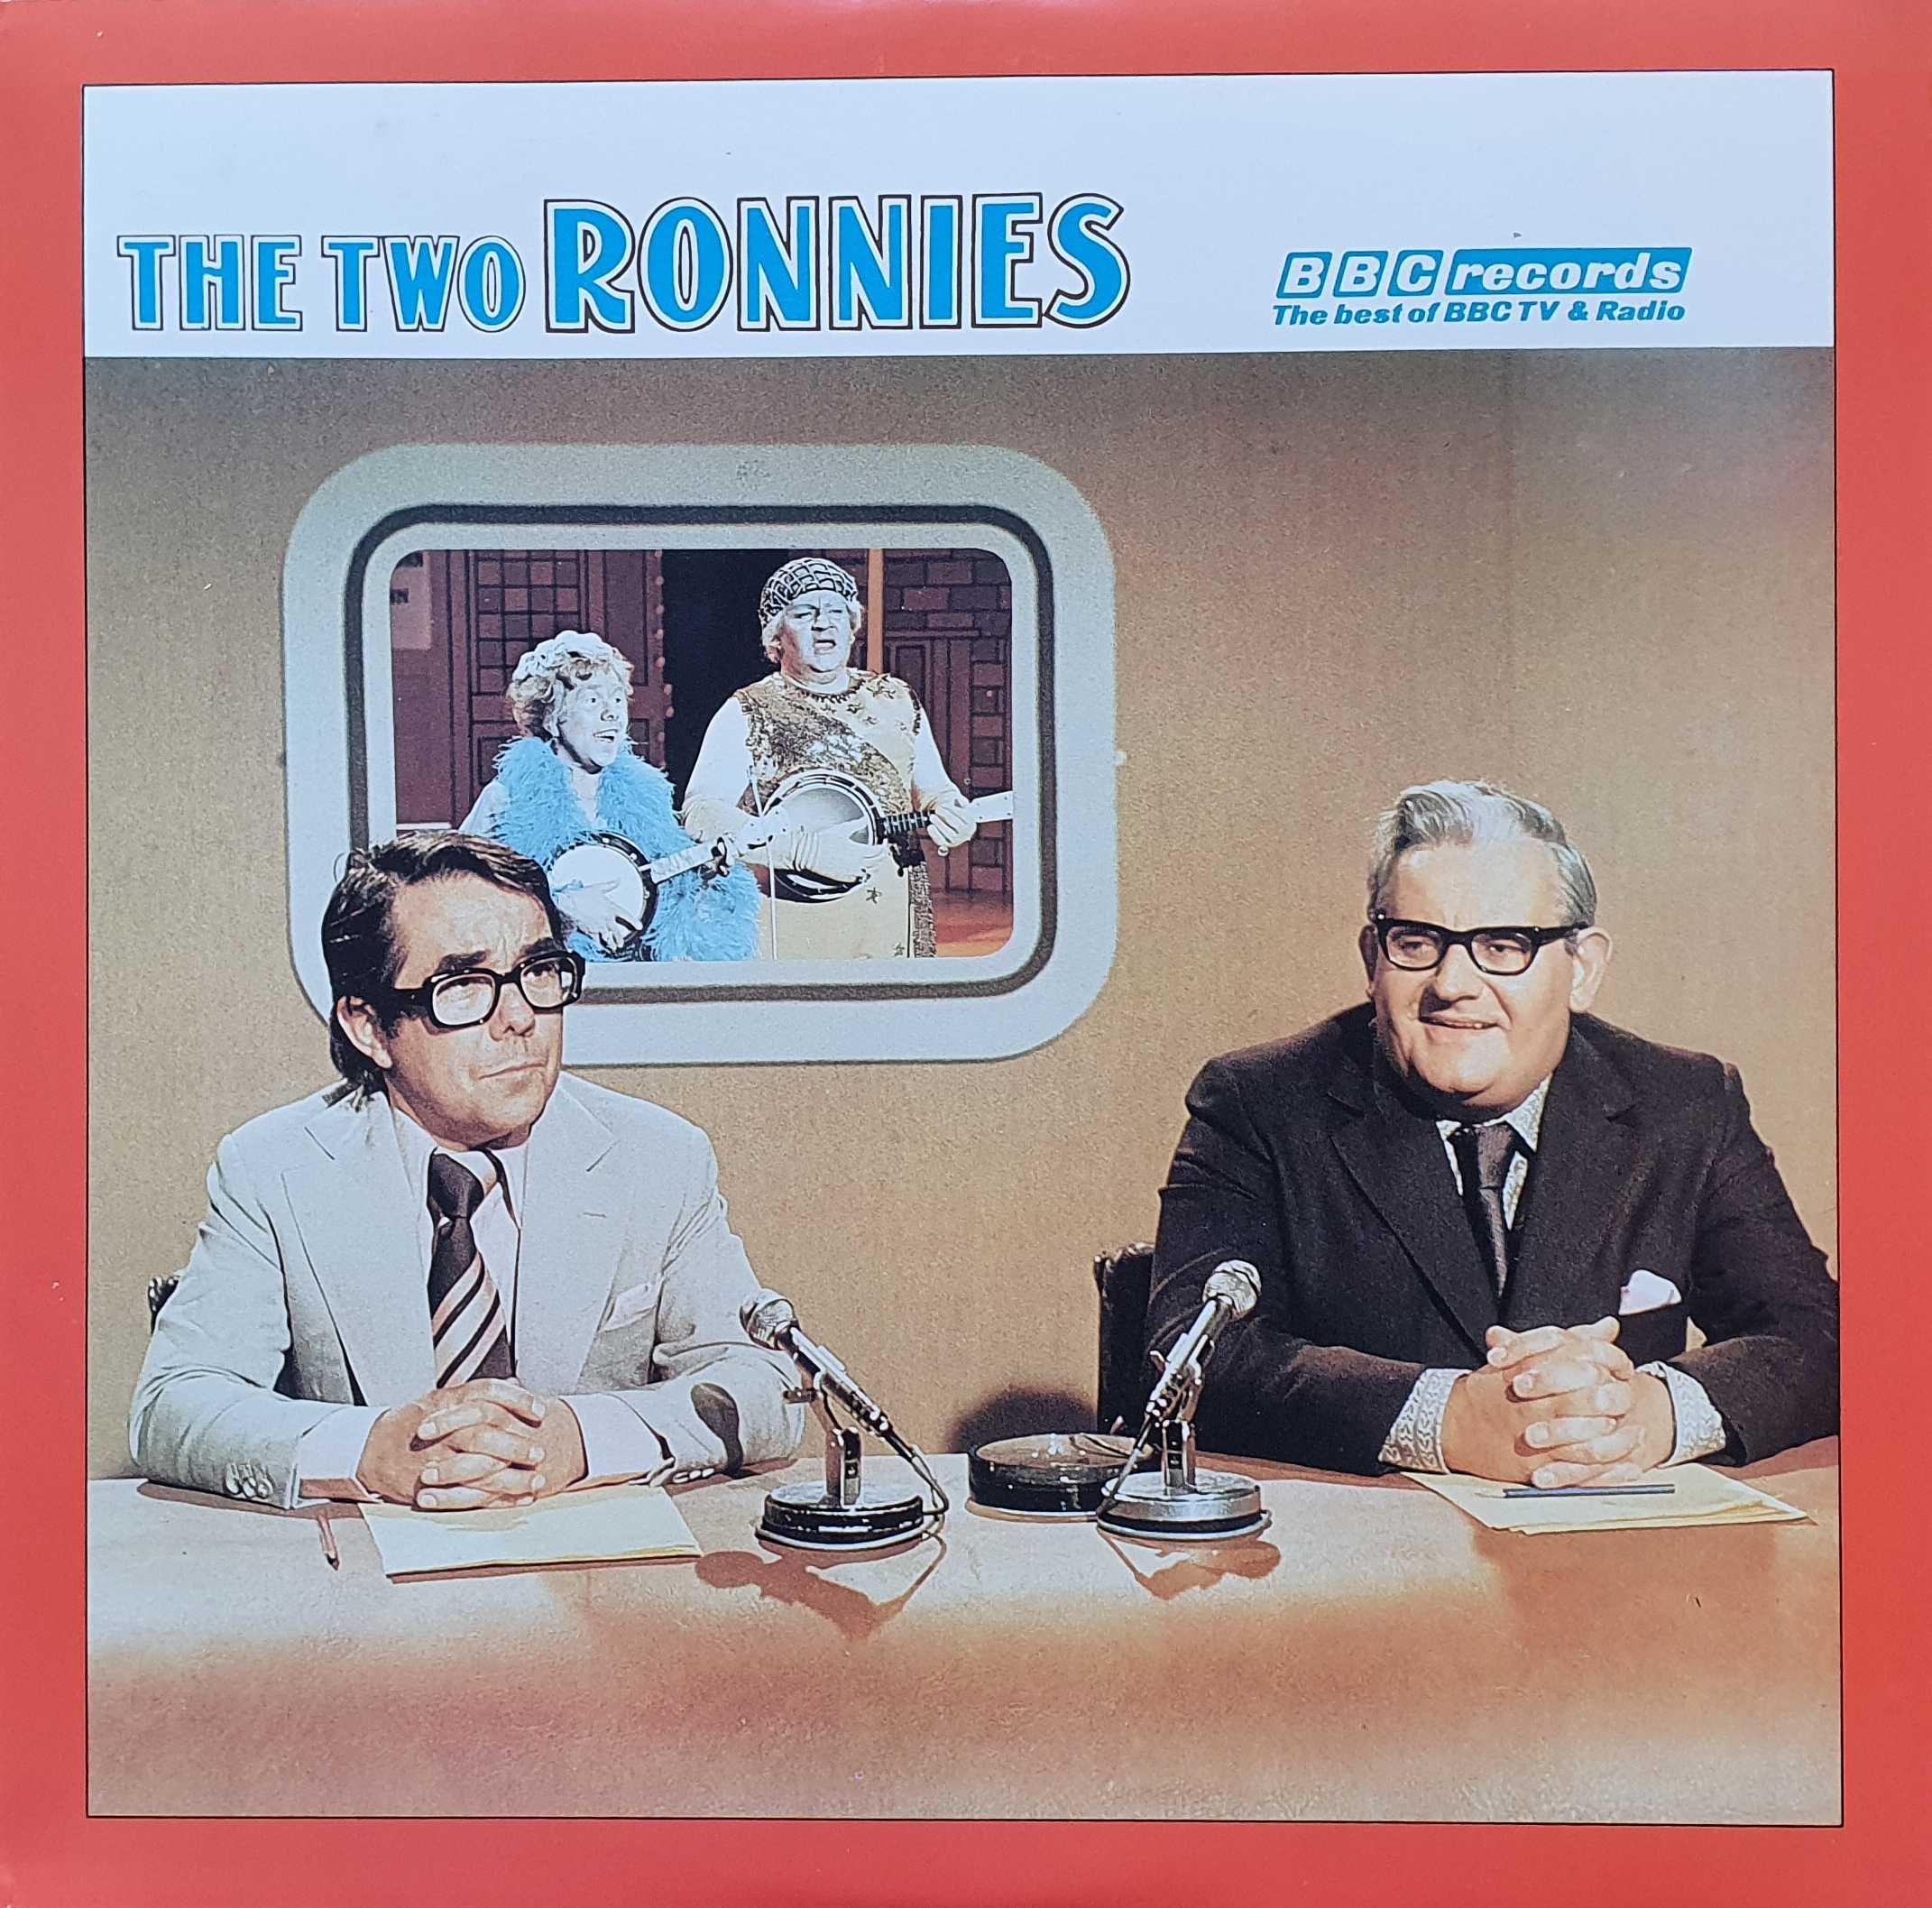 Picture of The two Ronnies by artist Various from the BBC albums - Records and Tapes library